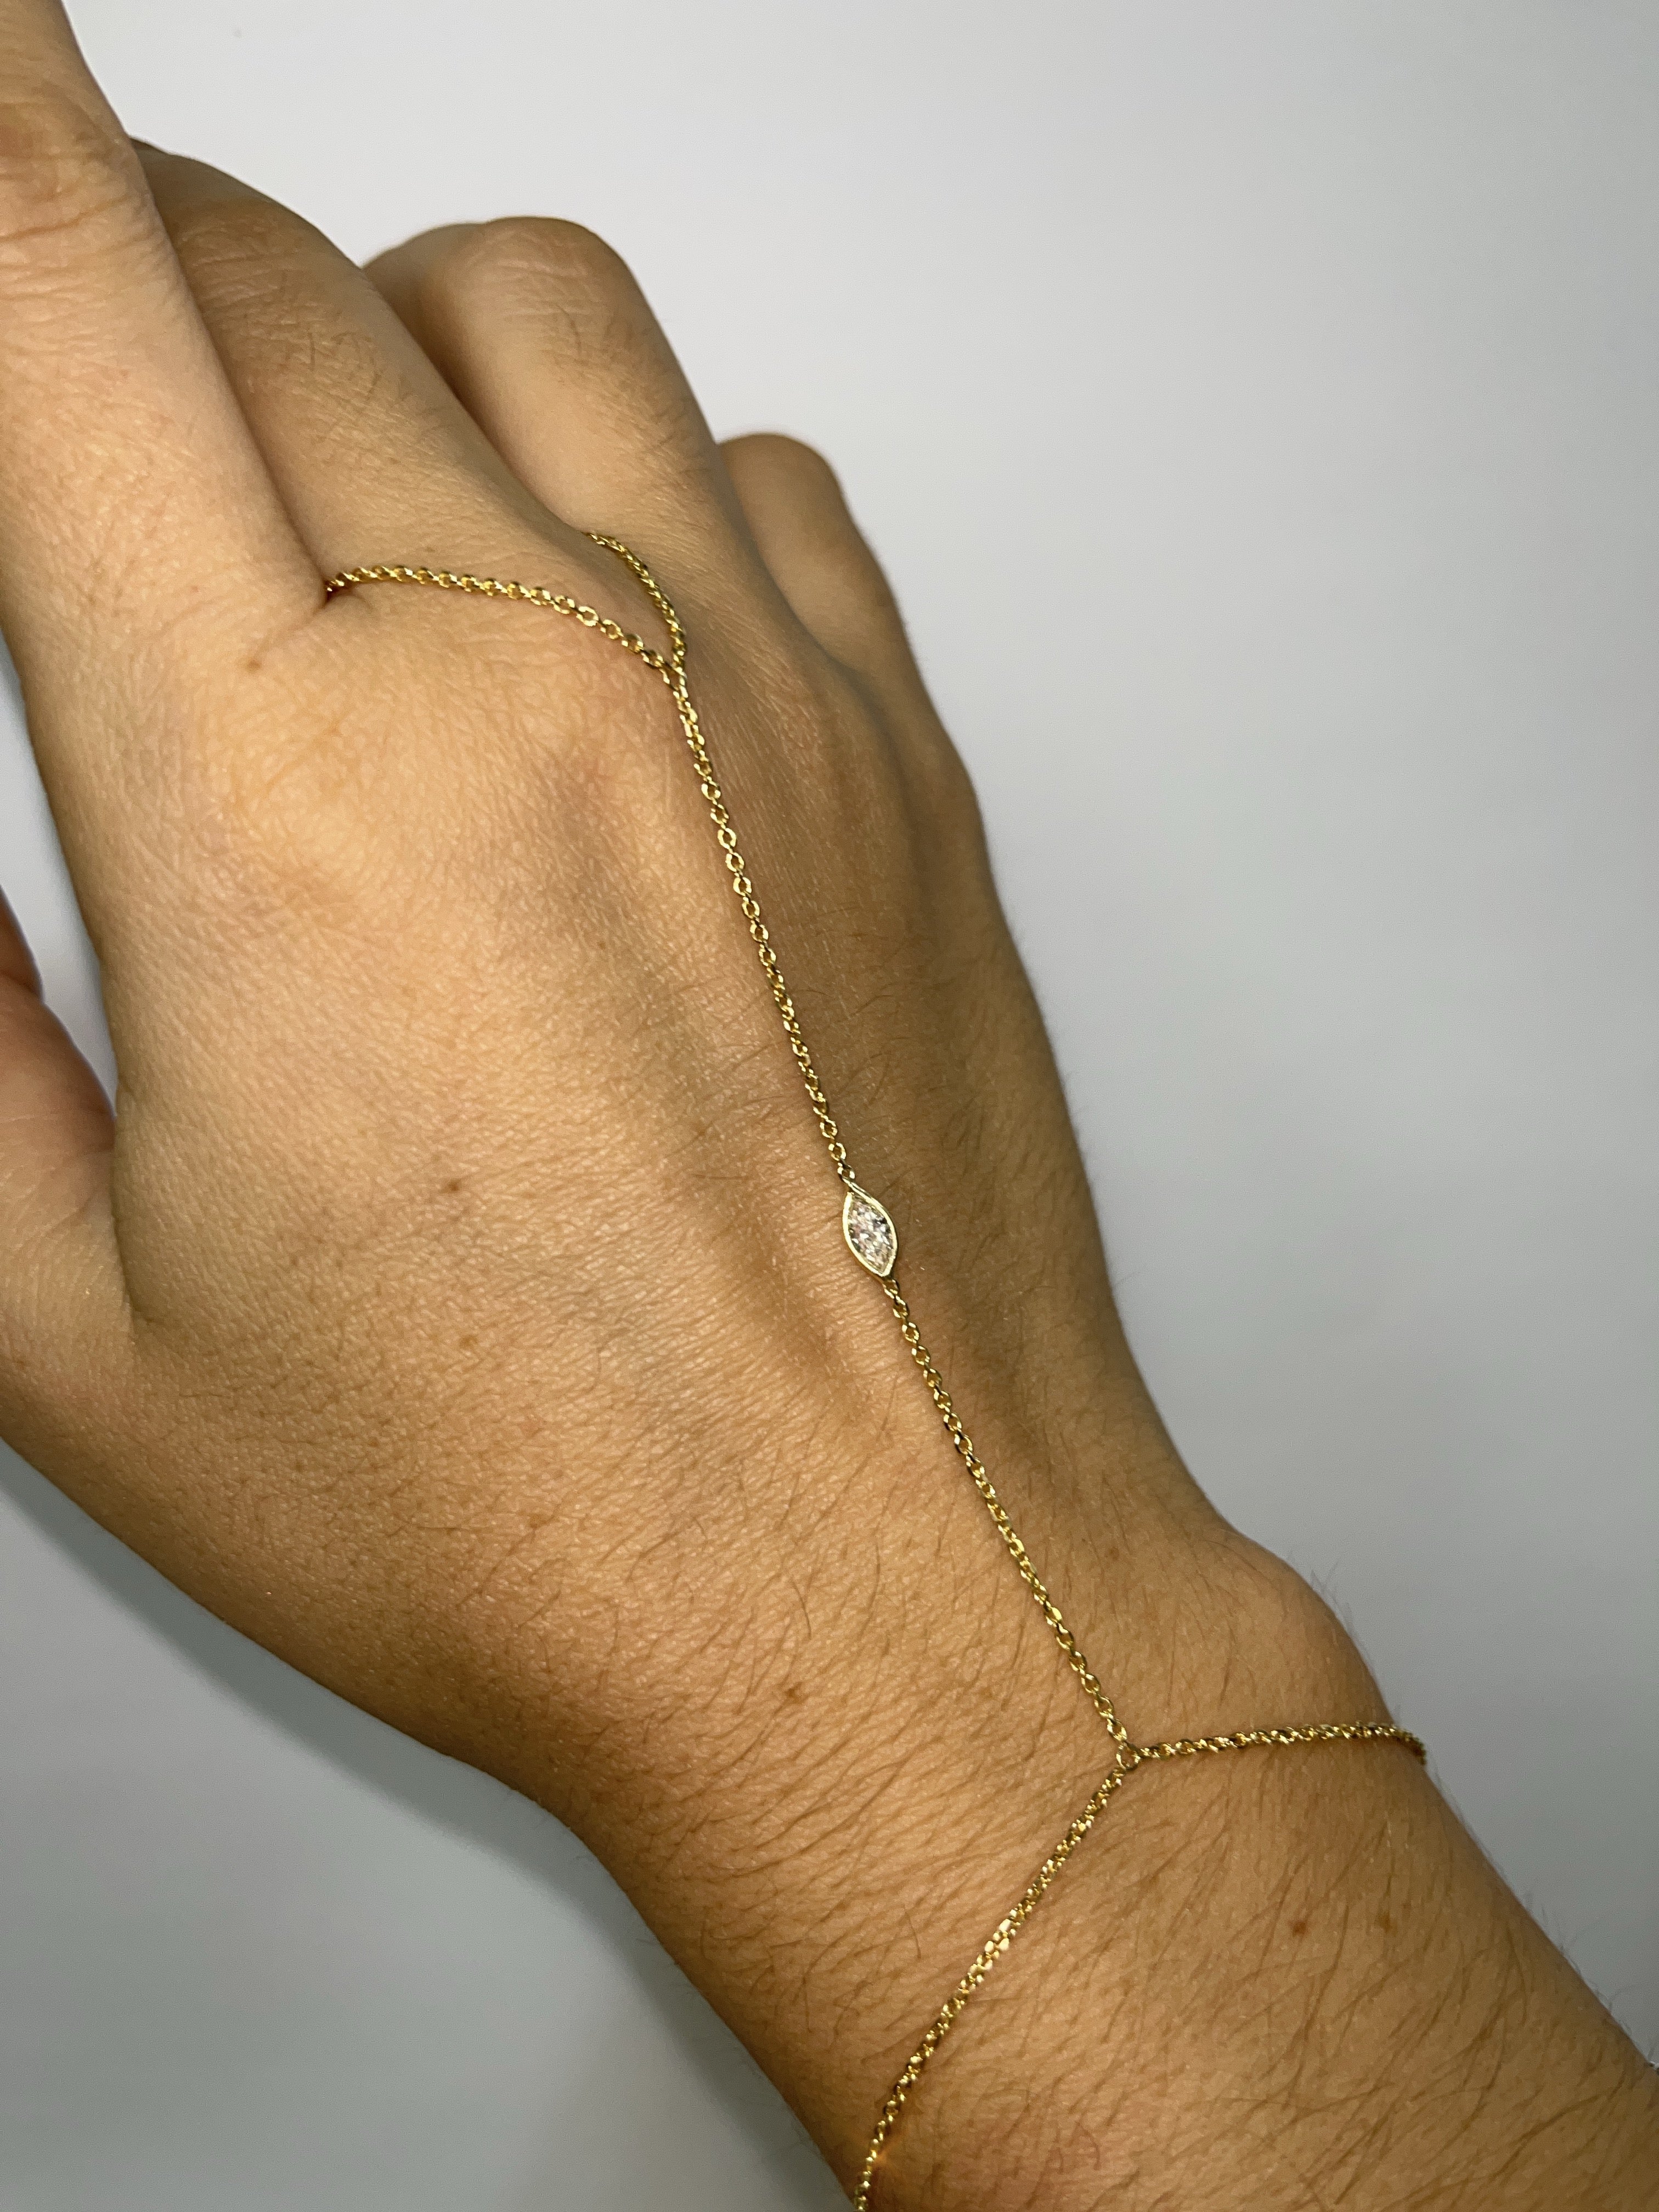 Marquise Diamond Hand Chain in Solid 14K Yellow Gold 7.5"